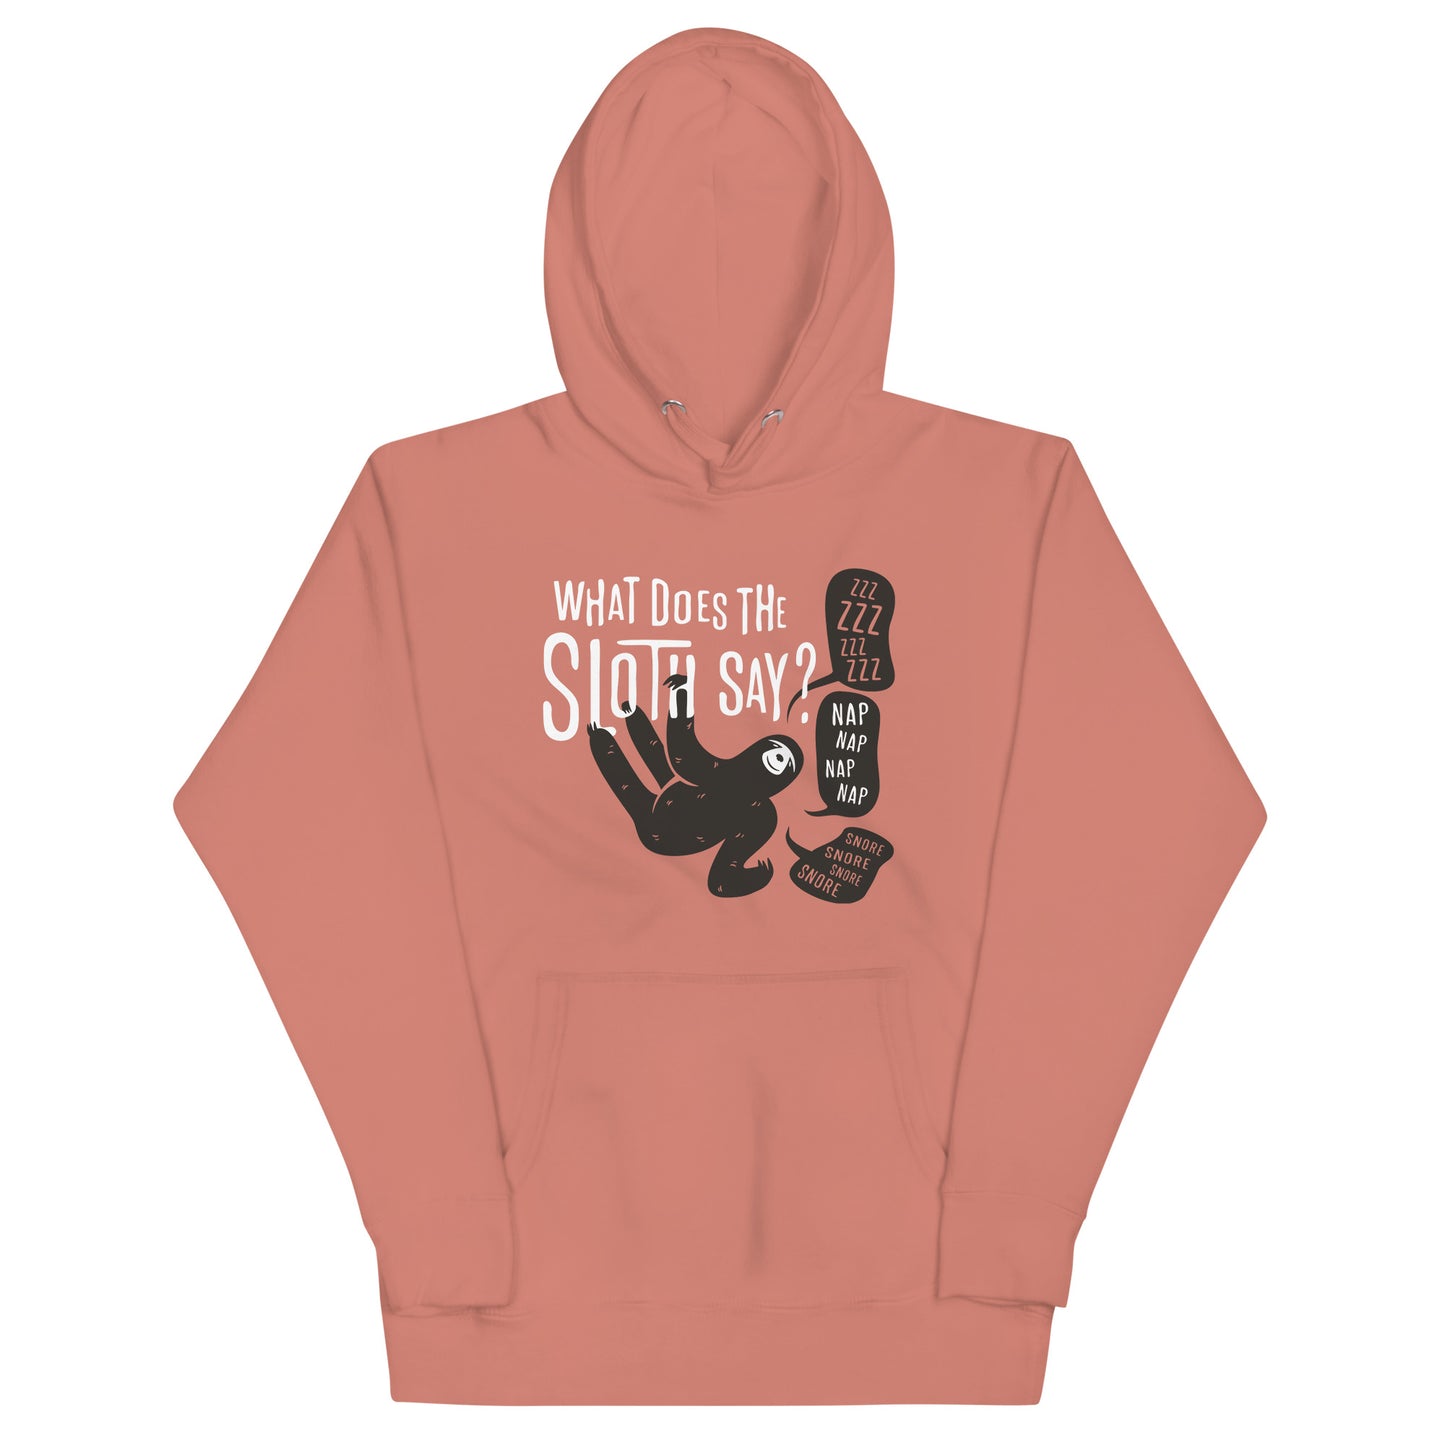 What Does The Sloth Say? Unisex Hoodie